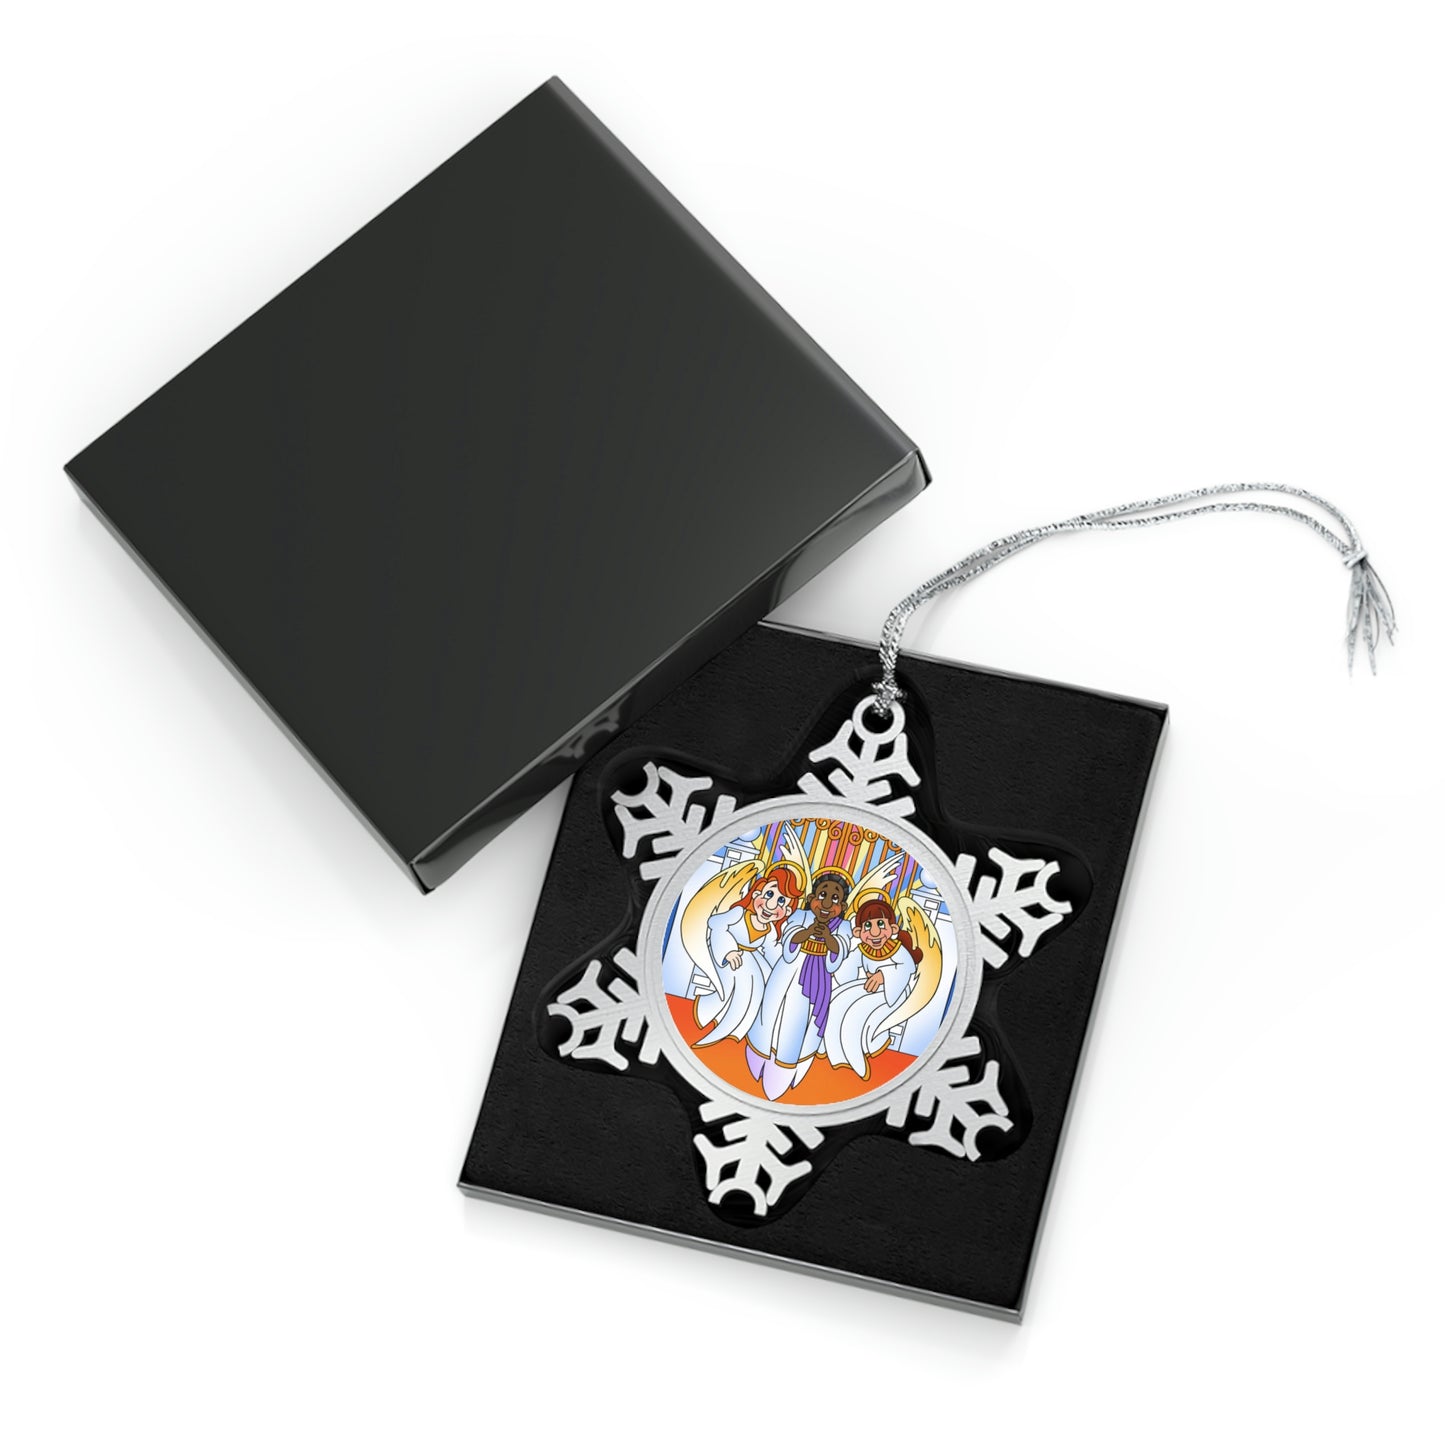 Shirley, Goodness, and Mercy Pewter Snowflake Ornament